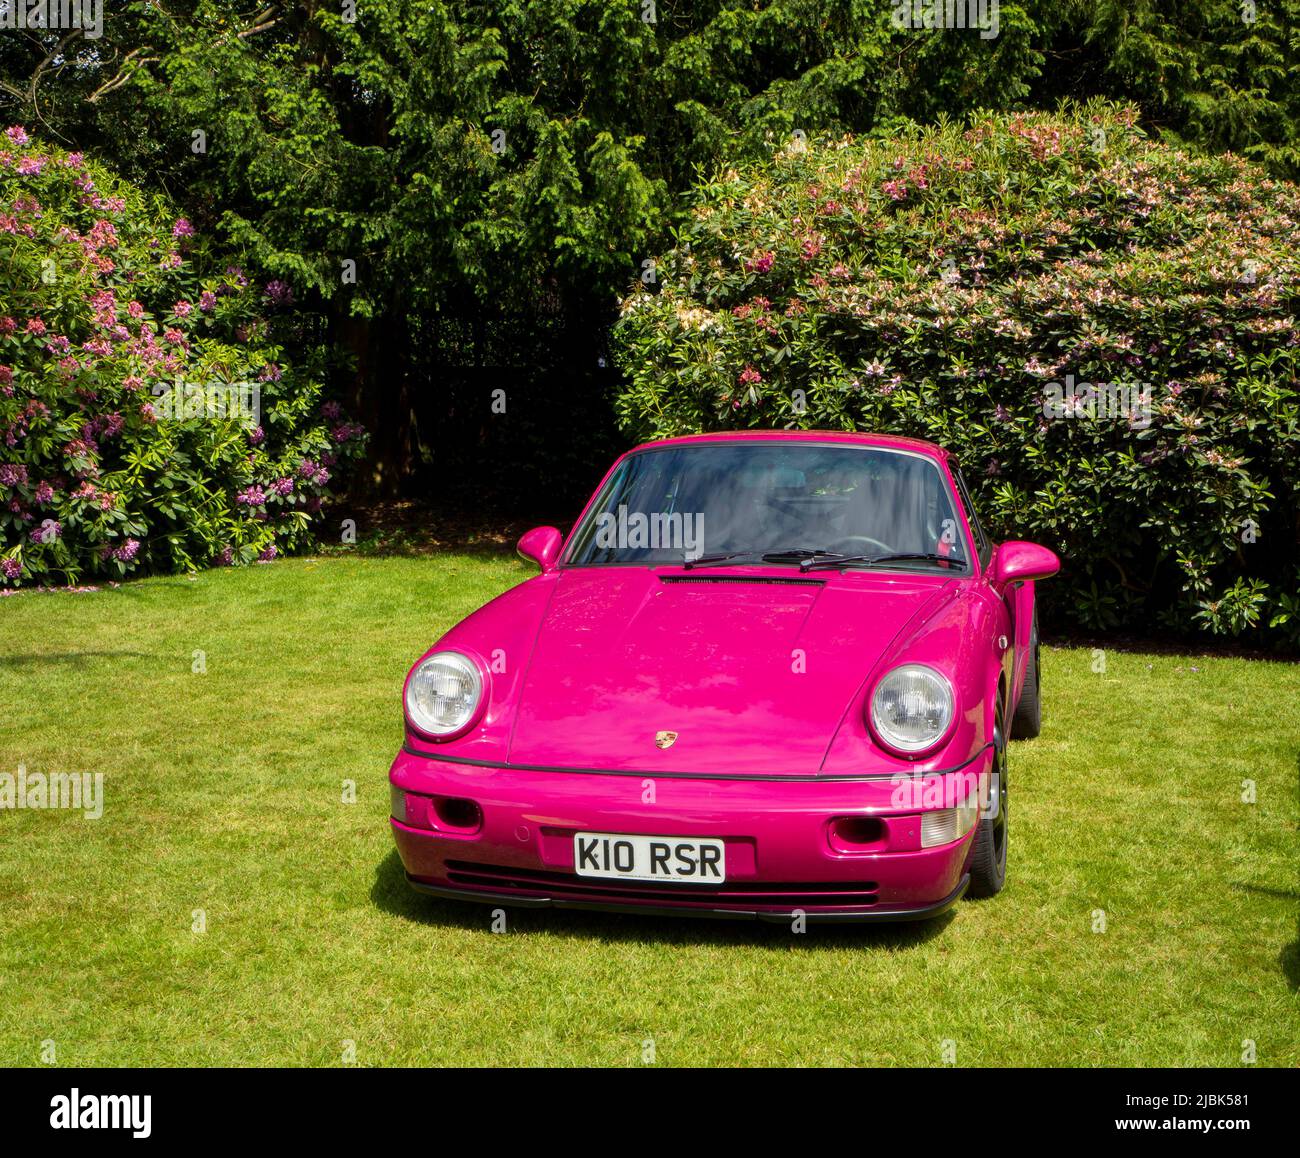 Pink Porsche in the grounds of Gawsworth Hall in front of flowering Rhododendron bushes Stock Photo